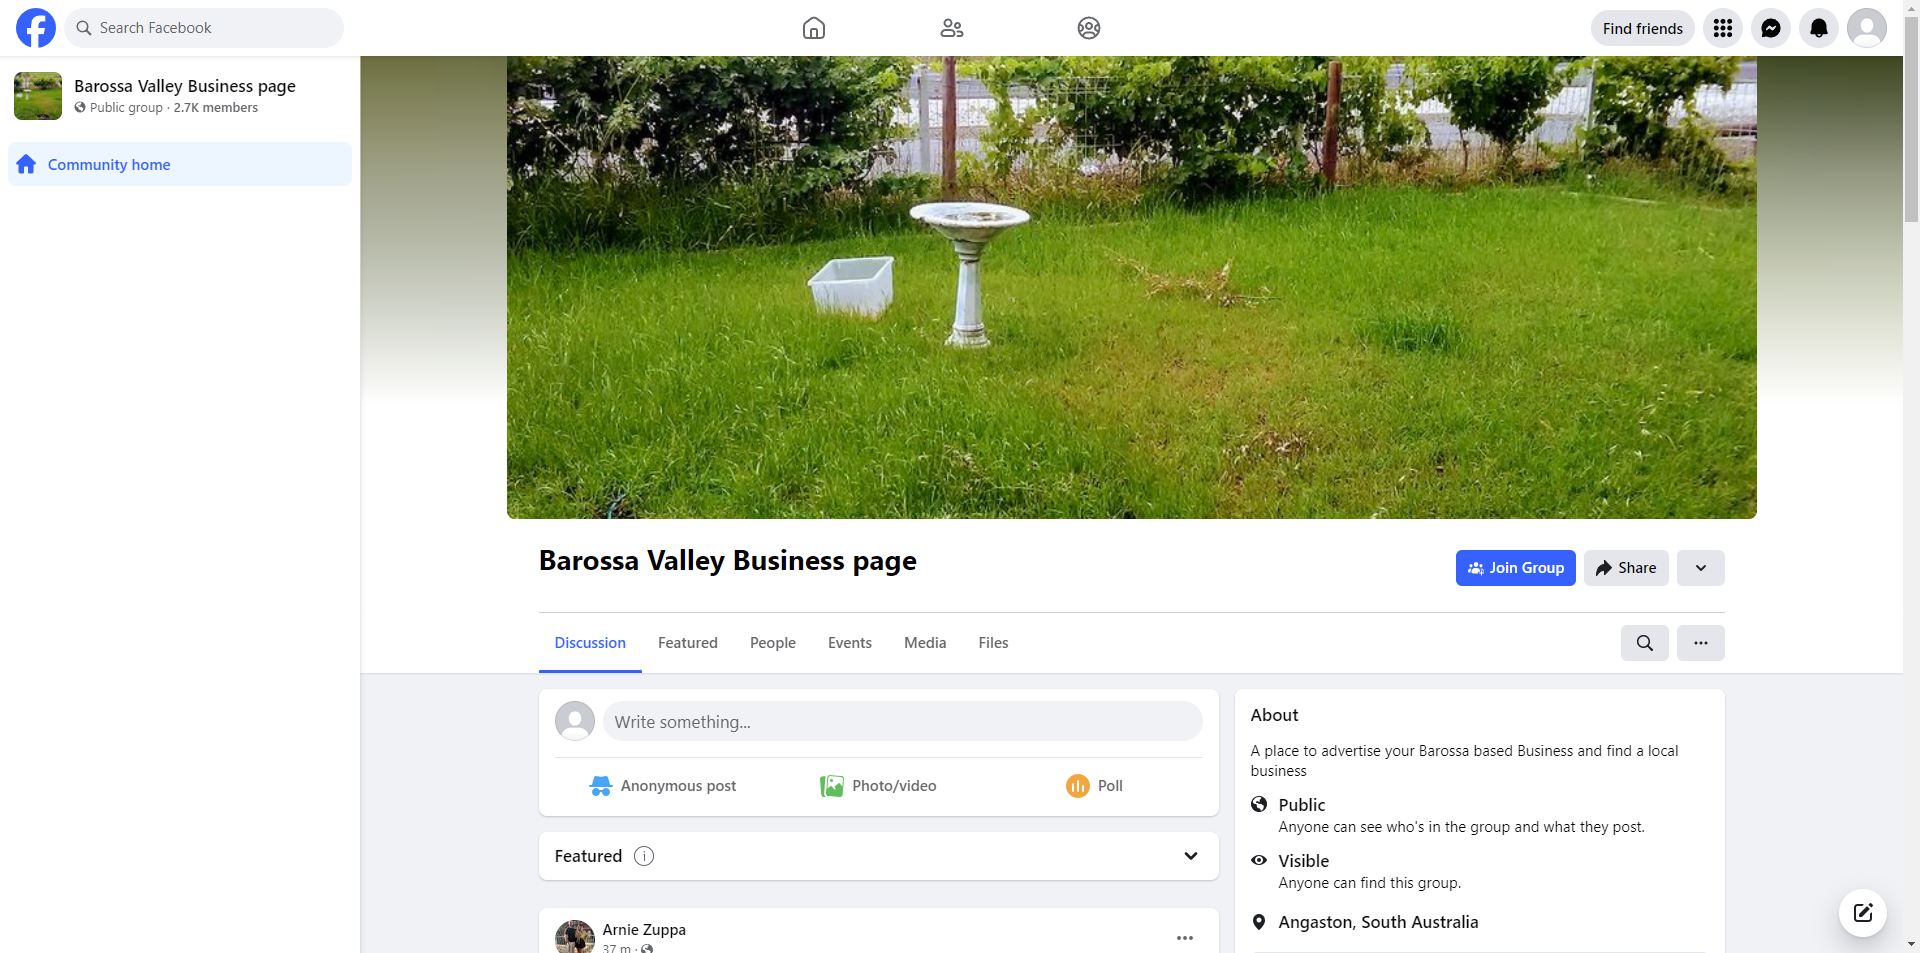 Barossa Valley Business Page